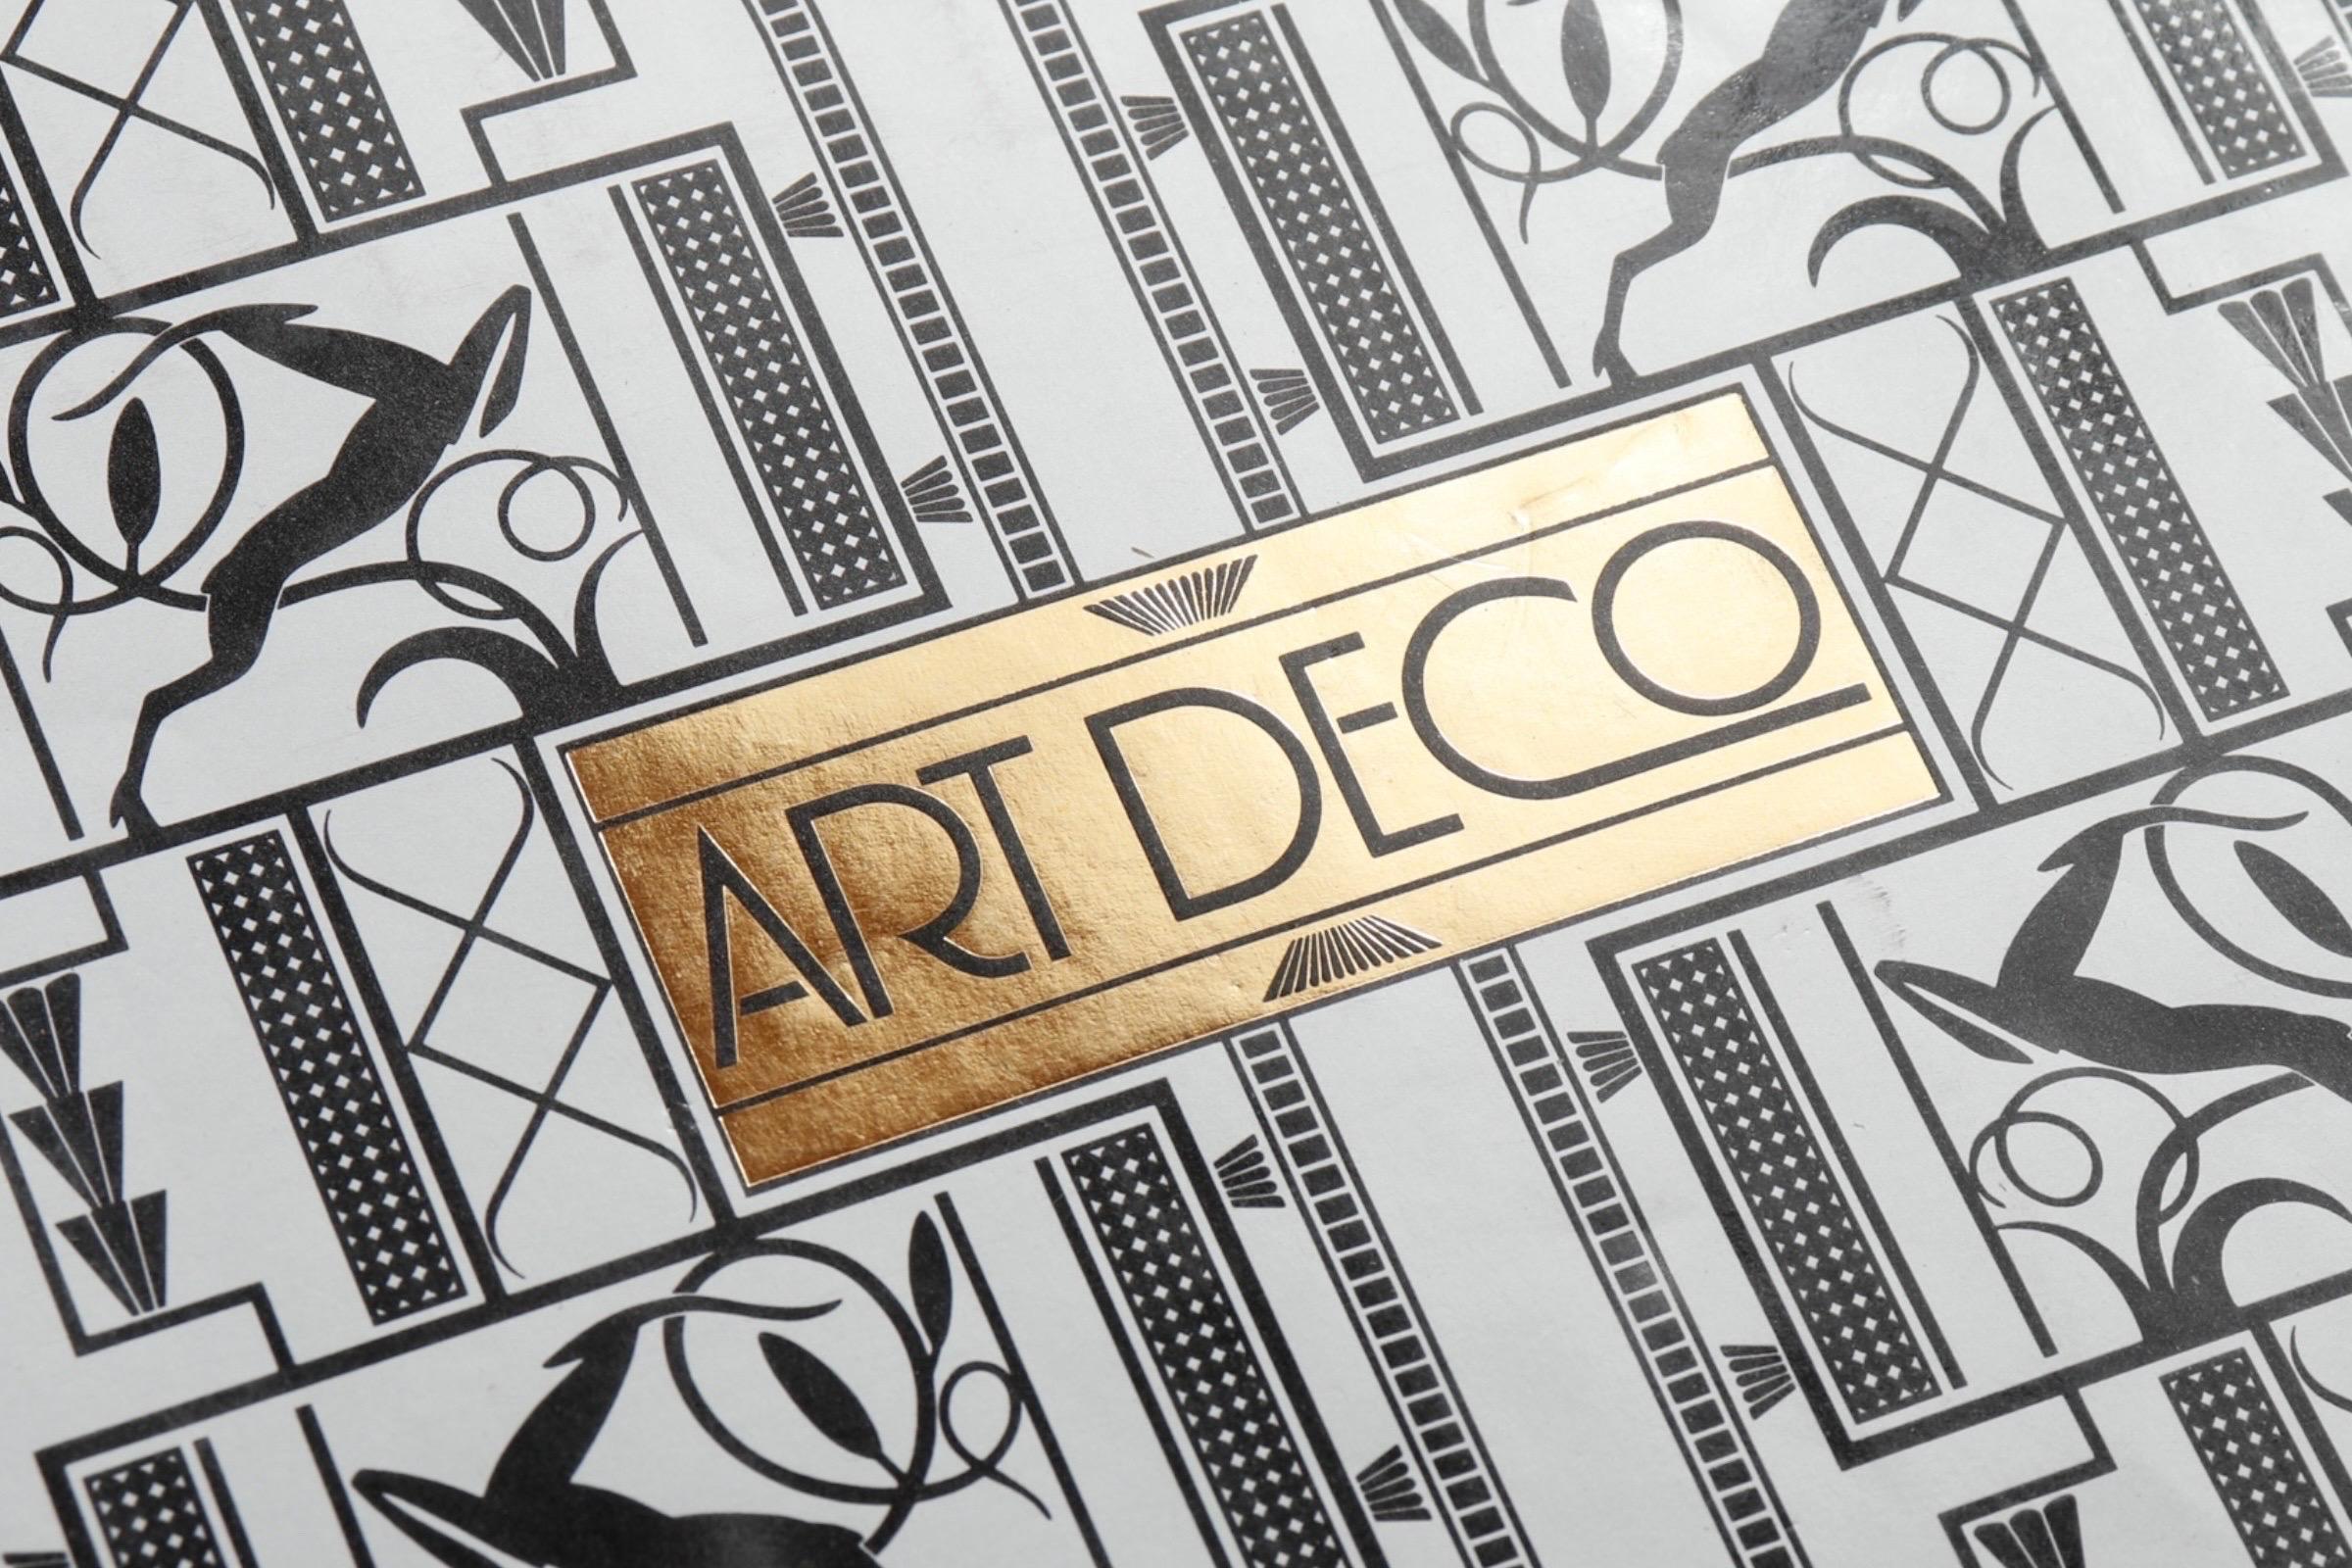 Art Deco by Victor Arwas, hardcover book with dustjacket. First edition, published by Harry N. Abrams, Inc. of New York in 1980. Printed and bound in Japan. 416 Illustrations, including 200 plates in full color, 315 pages.
